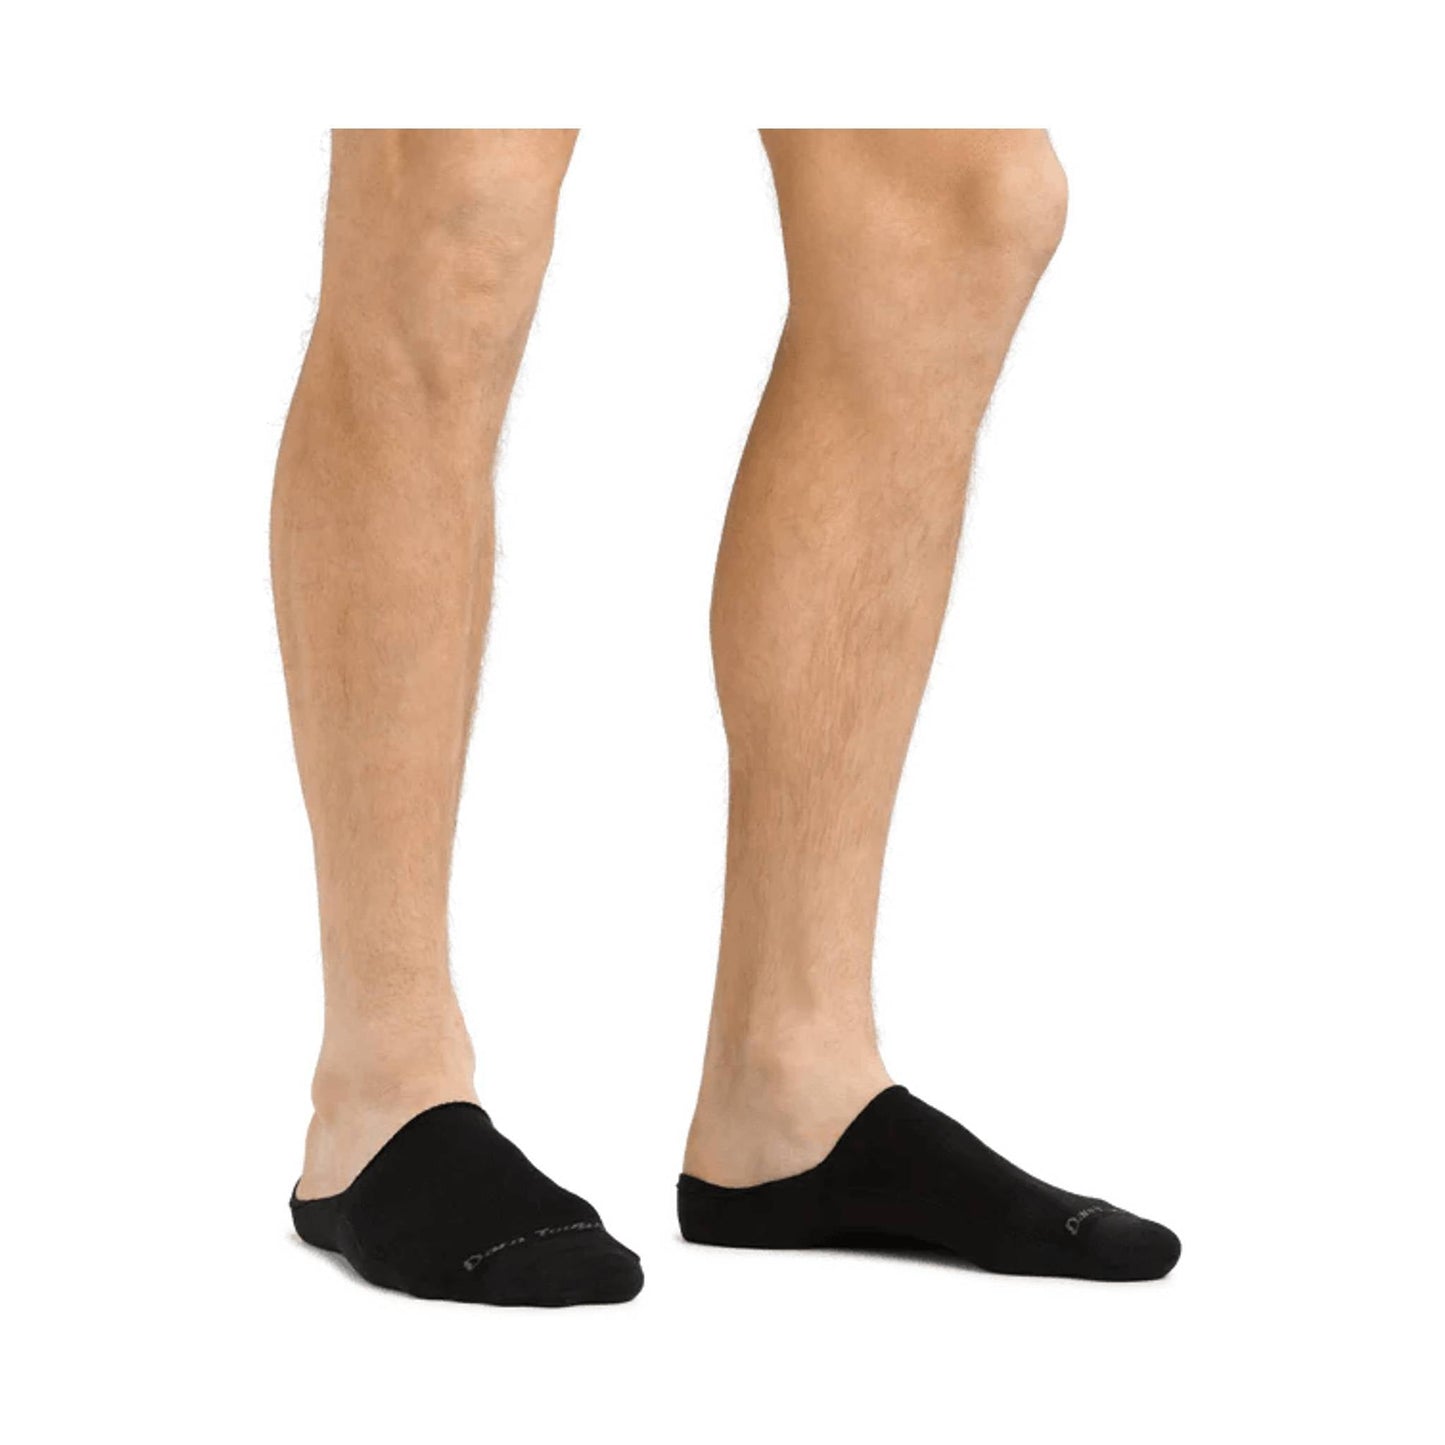 Darn Tough Men's Topless Solid No Show Lightweight Lifestyle Sock - Black